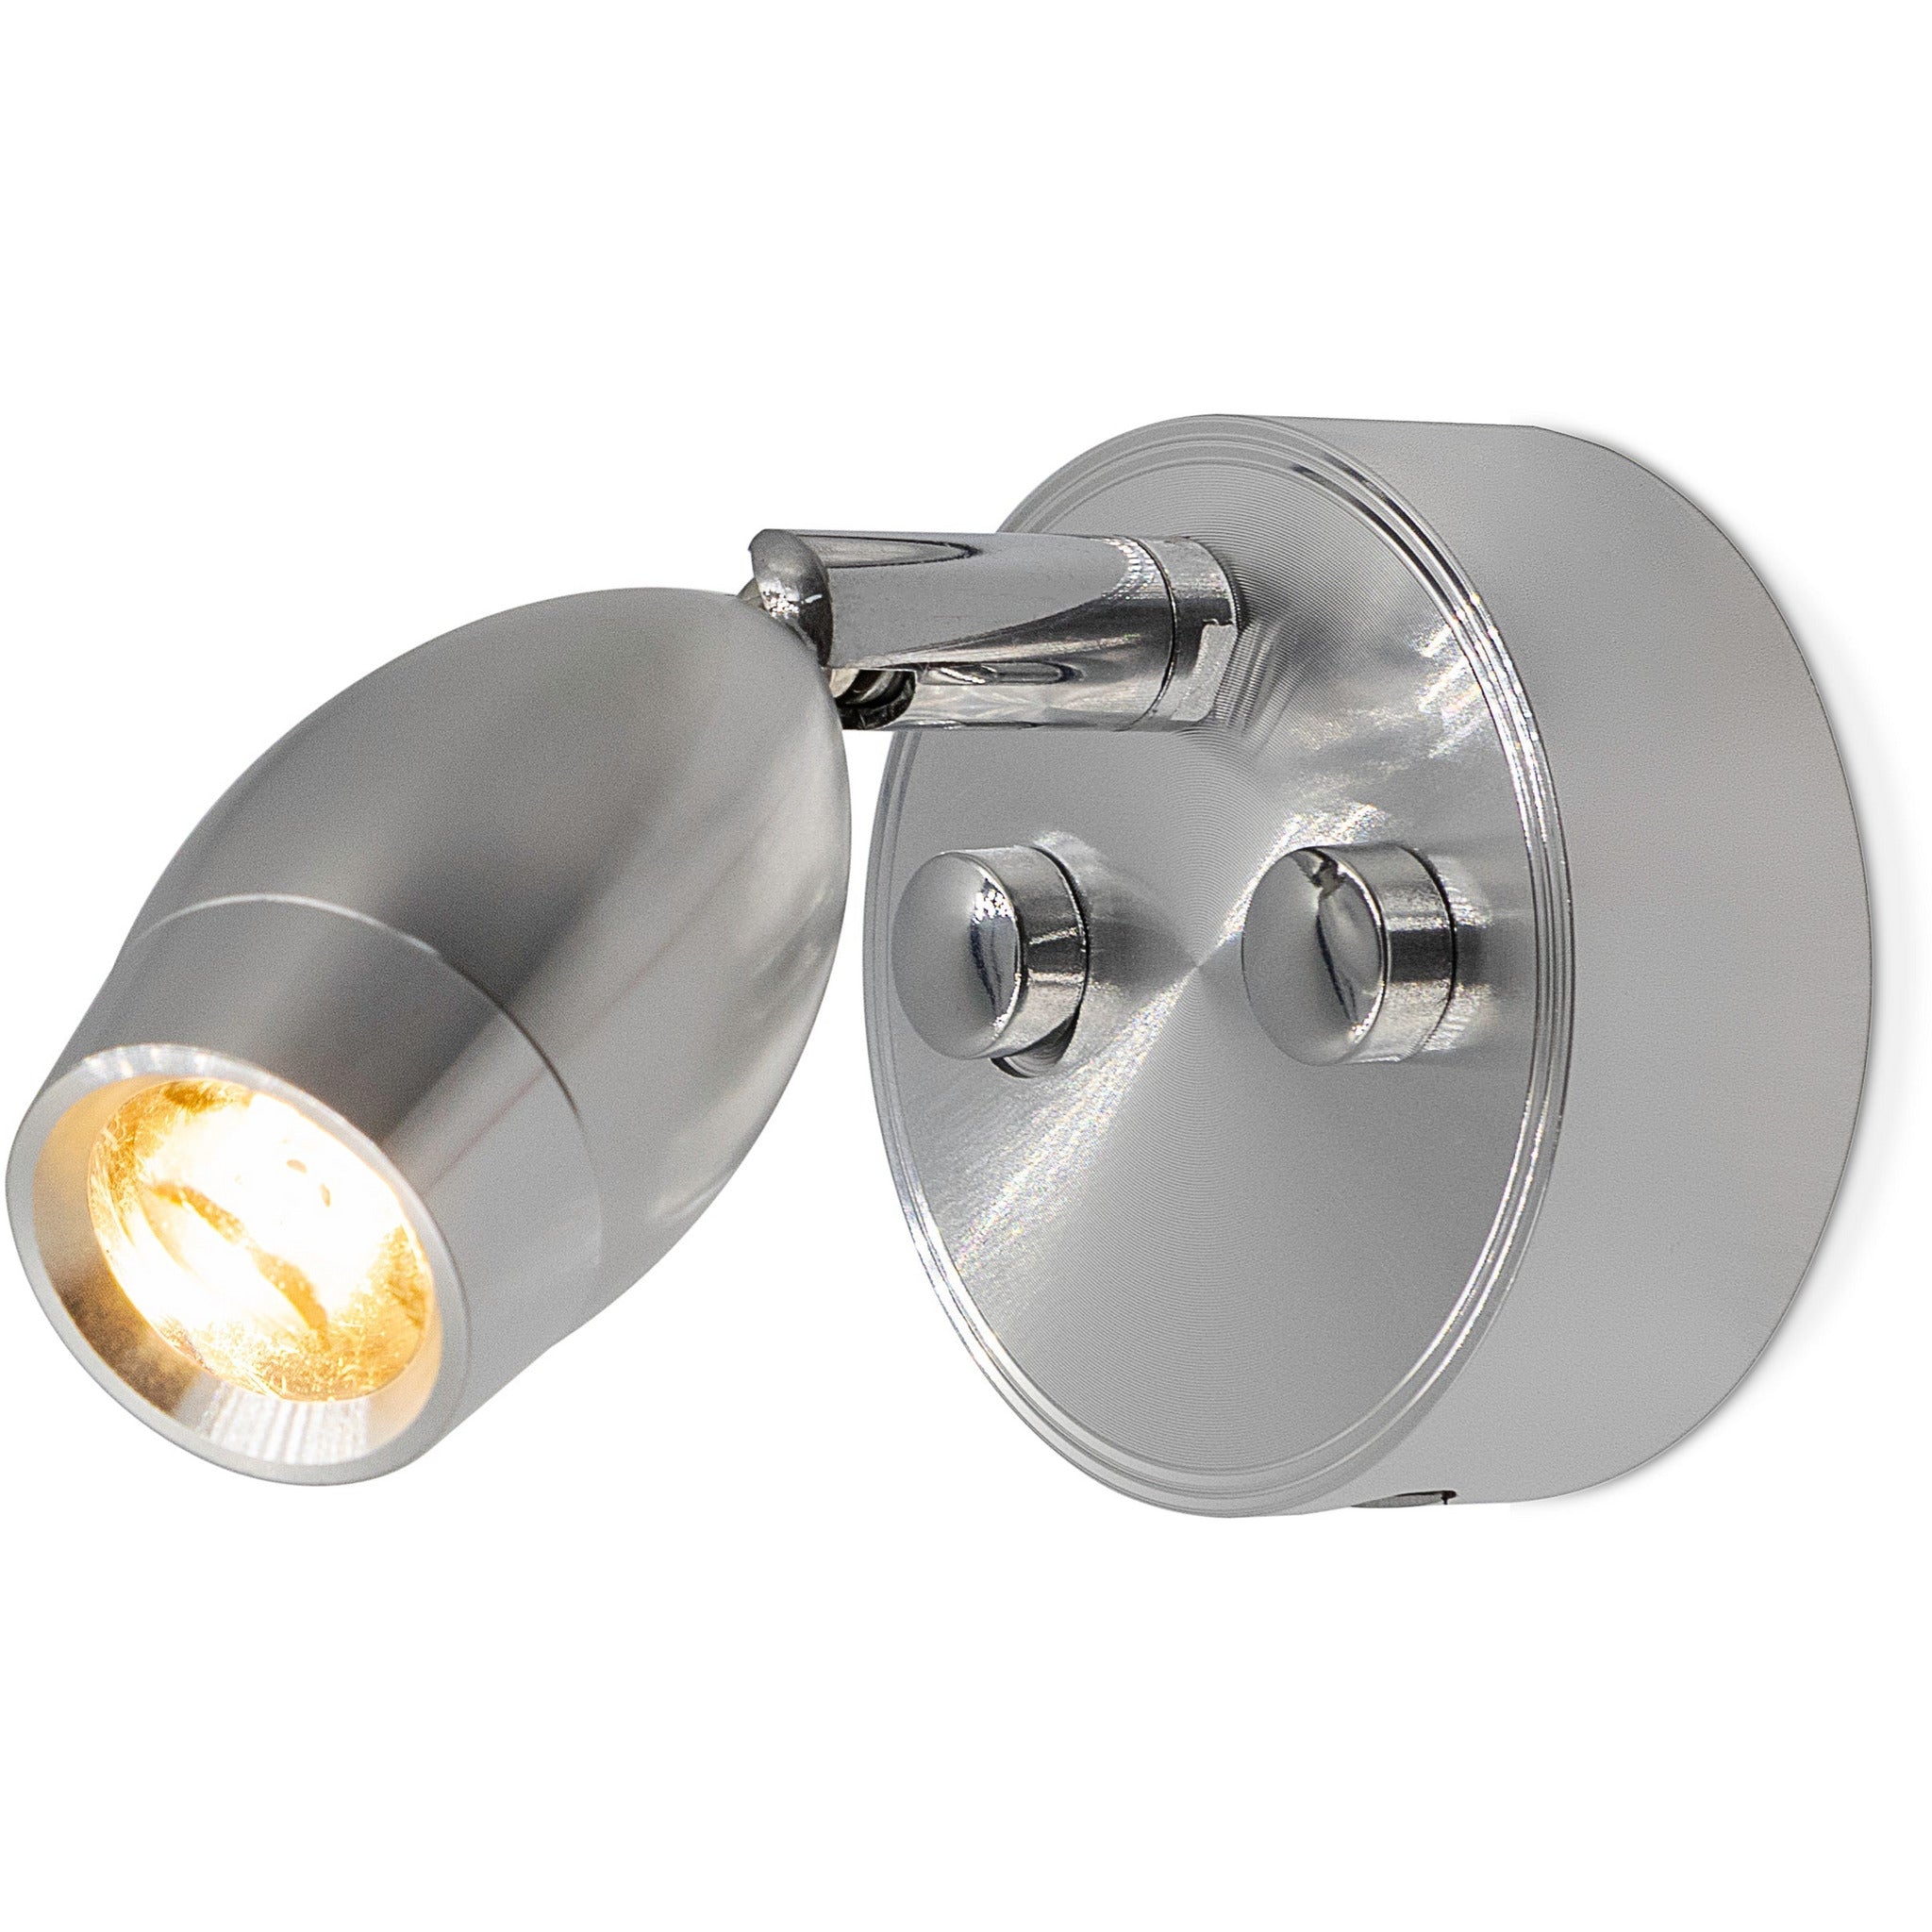 Silver LED 300mm Spotlight with USB - Dimmable, Touch On/Off (Warm White) Kiravans 